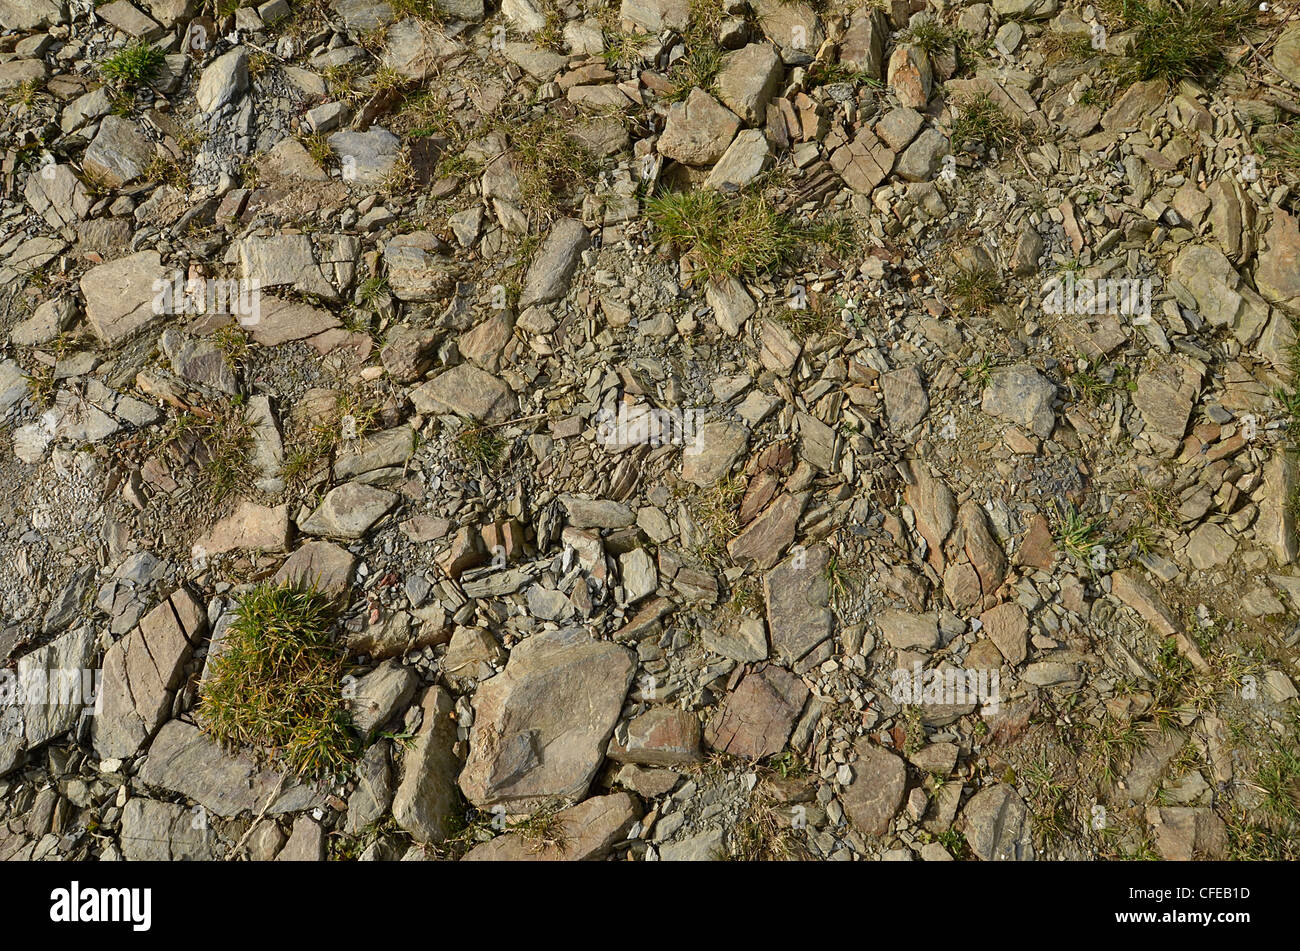 Detail of compacted stone farm trackway. Concept 'fall on stony ground', warnings or advice ignored. etc. Stock Photo